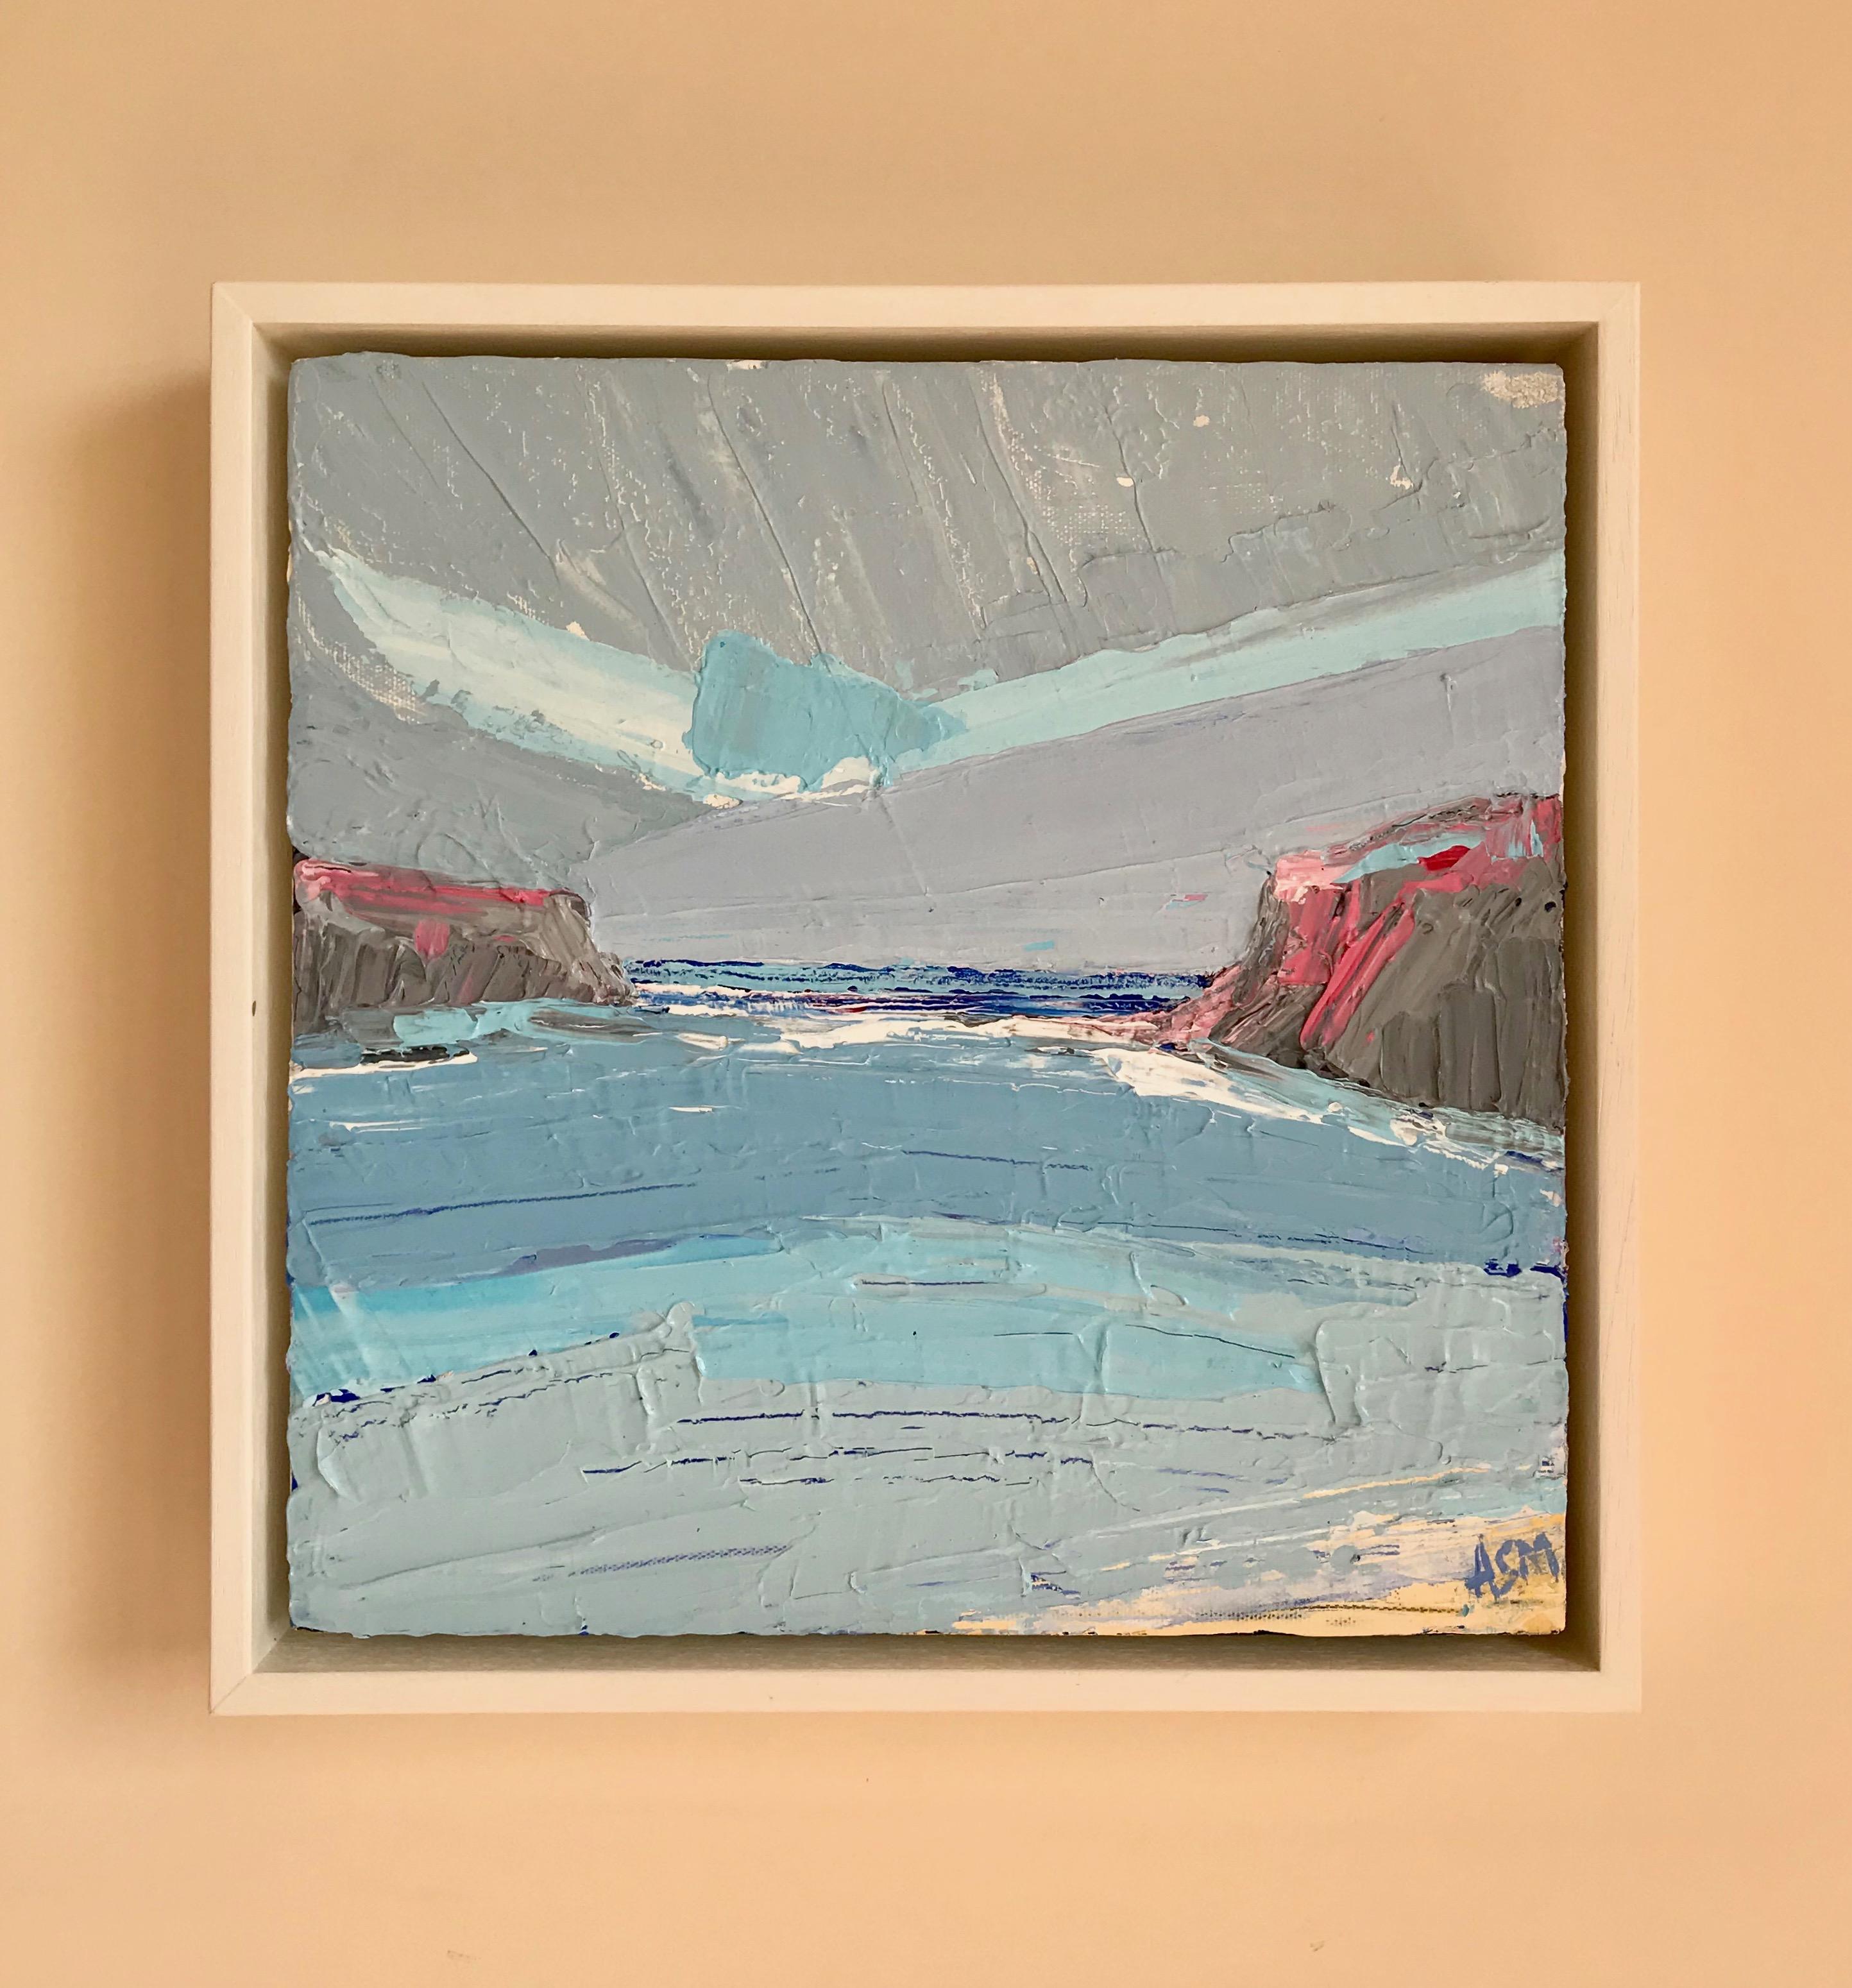 Annabel Menheneott
Lulworth
Original Painting
Acrylic on canvas
Canvas Size: 30cm x 30cm x 3.5 cm
Framed Size: 35cm x 35cm x 5.5cm
Sold Framed in a bespoke contemporary tray frame painted in Wimborne White
Free Shipping
Please note that in situ